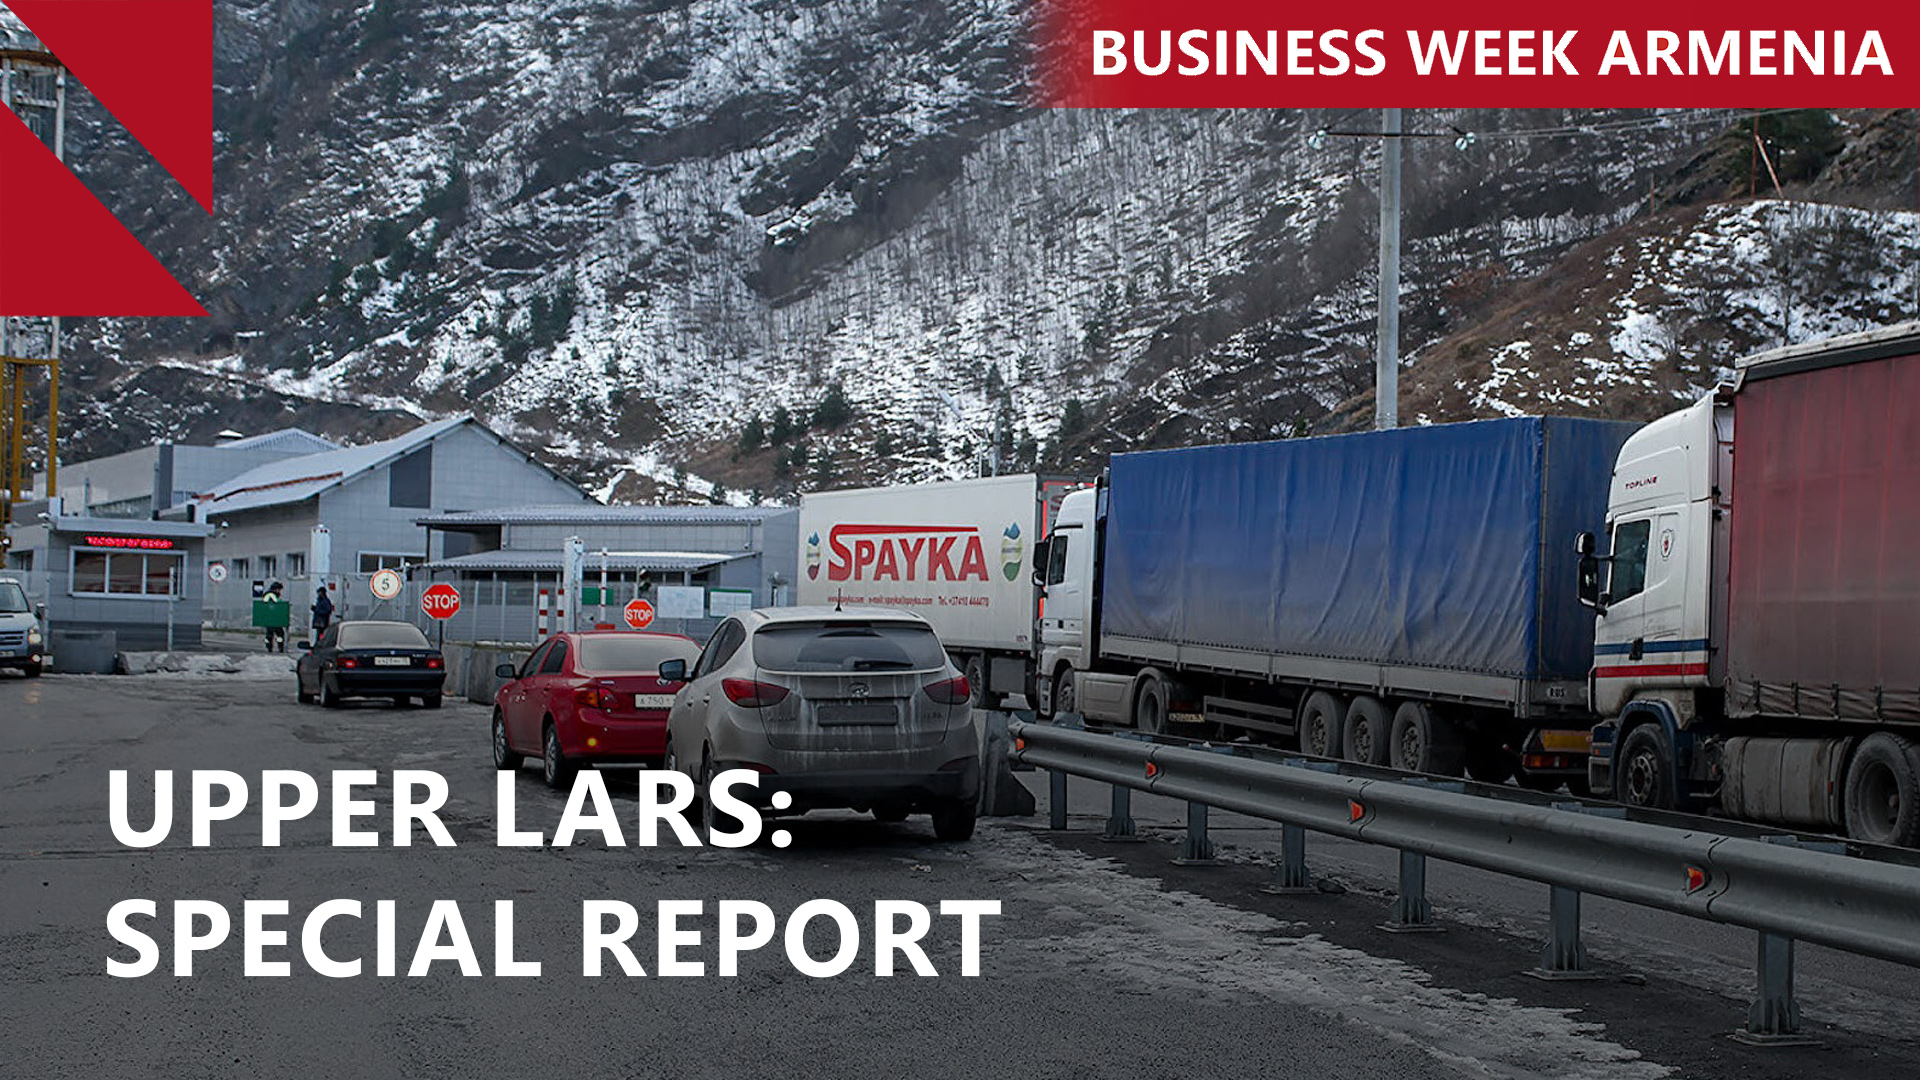 Trade war fears grow as Armenian trucks pile up at Russian border: THIS WEEK IN BUSINESS